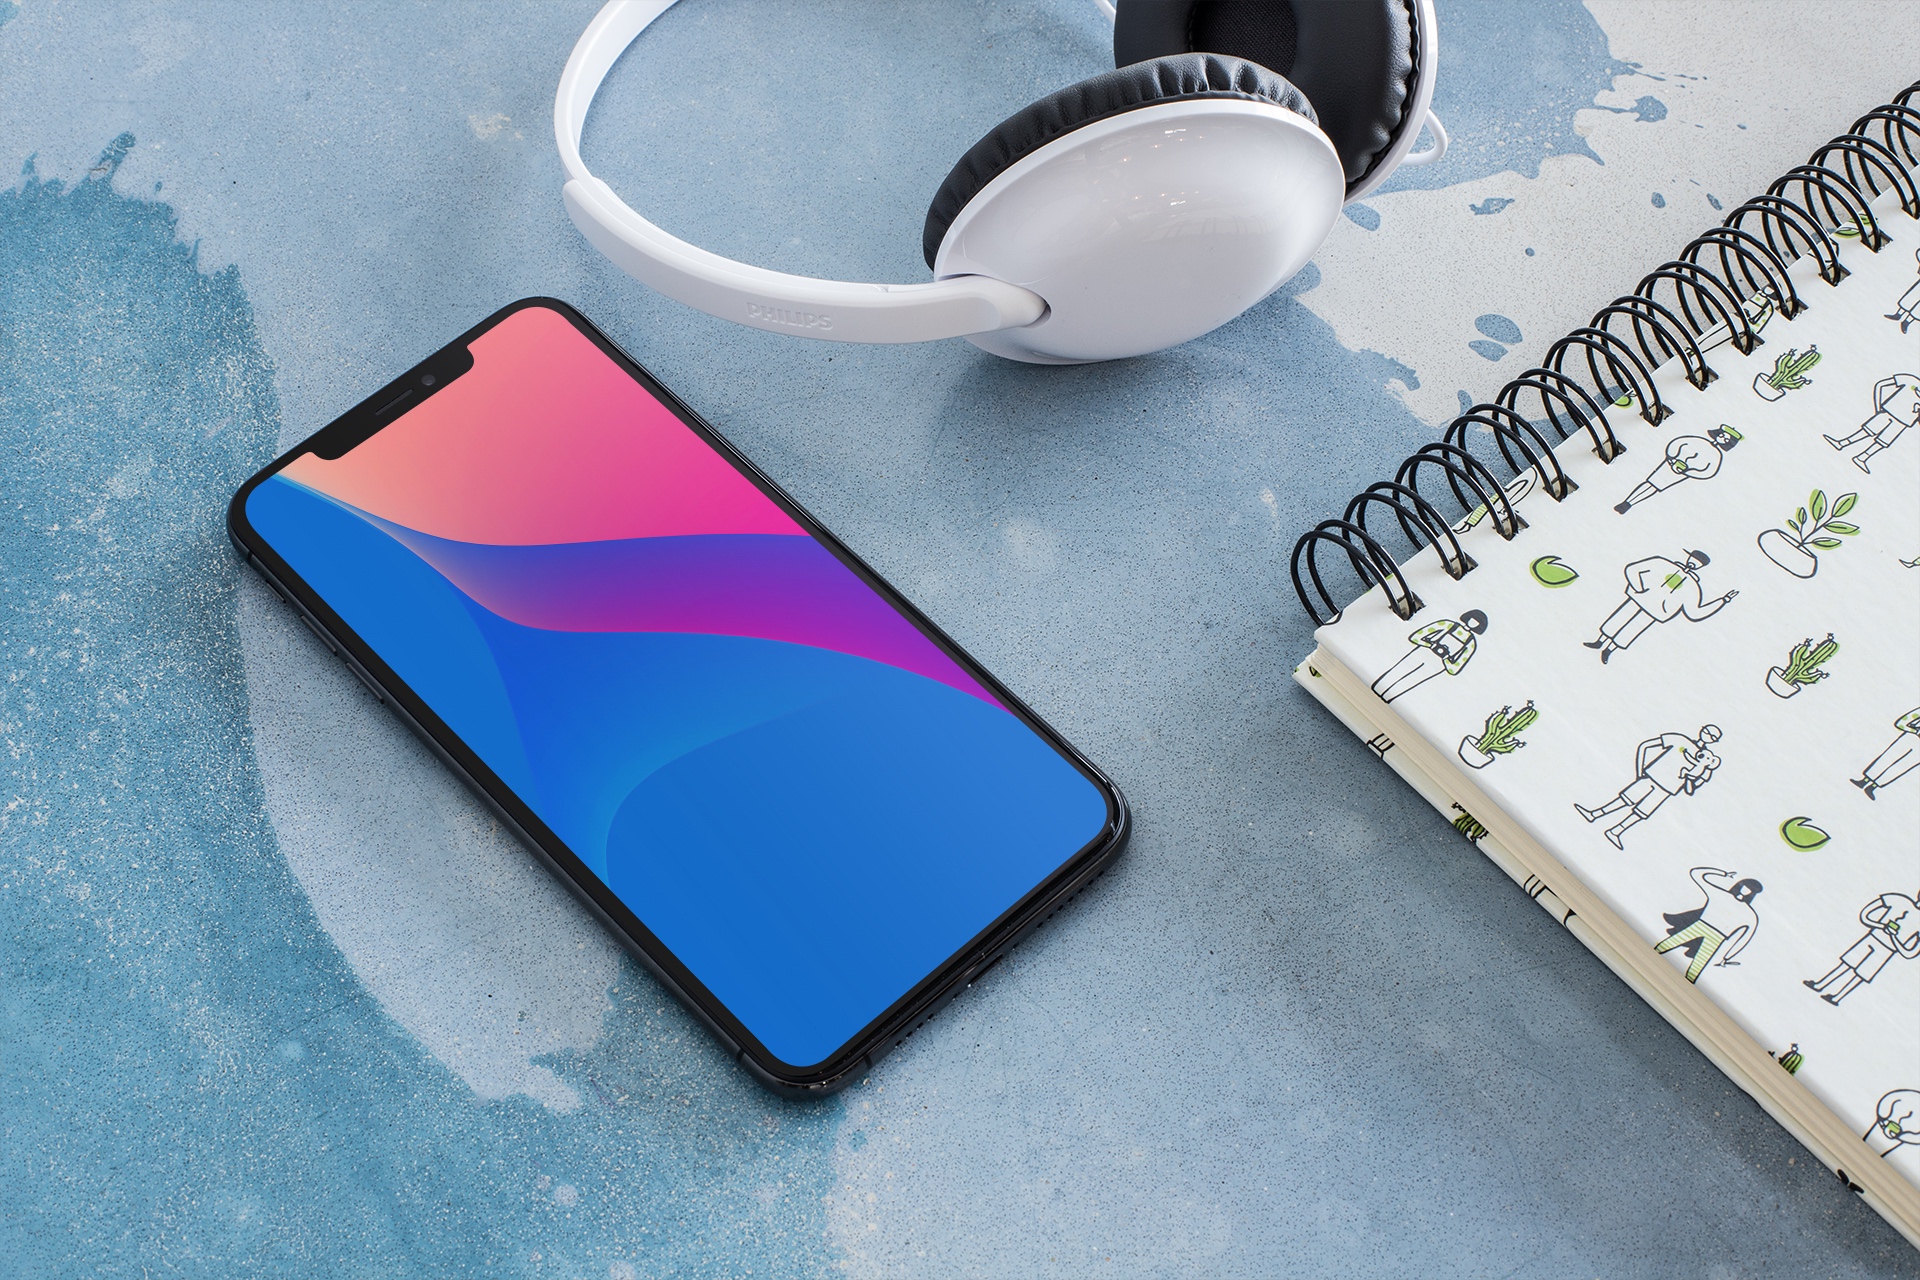 iphone-x-mockup-for-podcasts-featuring-a-pair-of-white-headphones-24717 ar72014 abstract color wallpaper